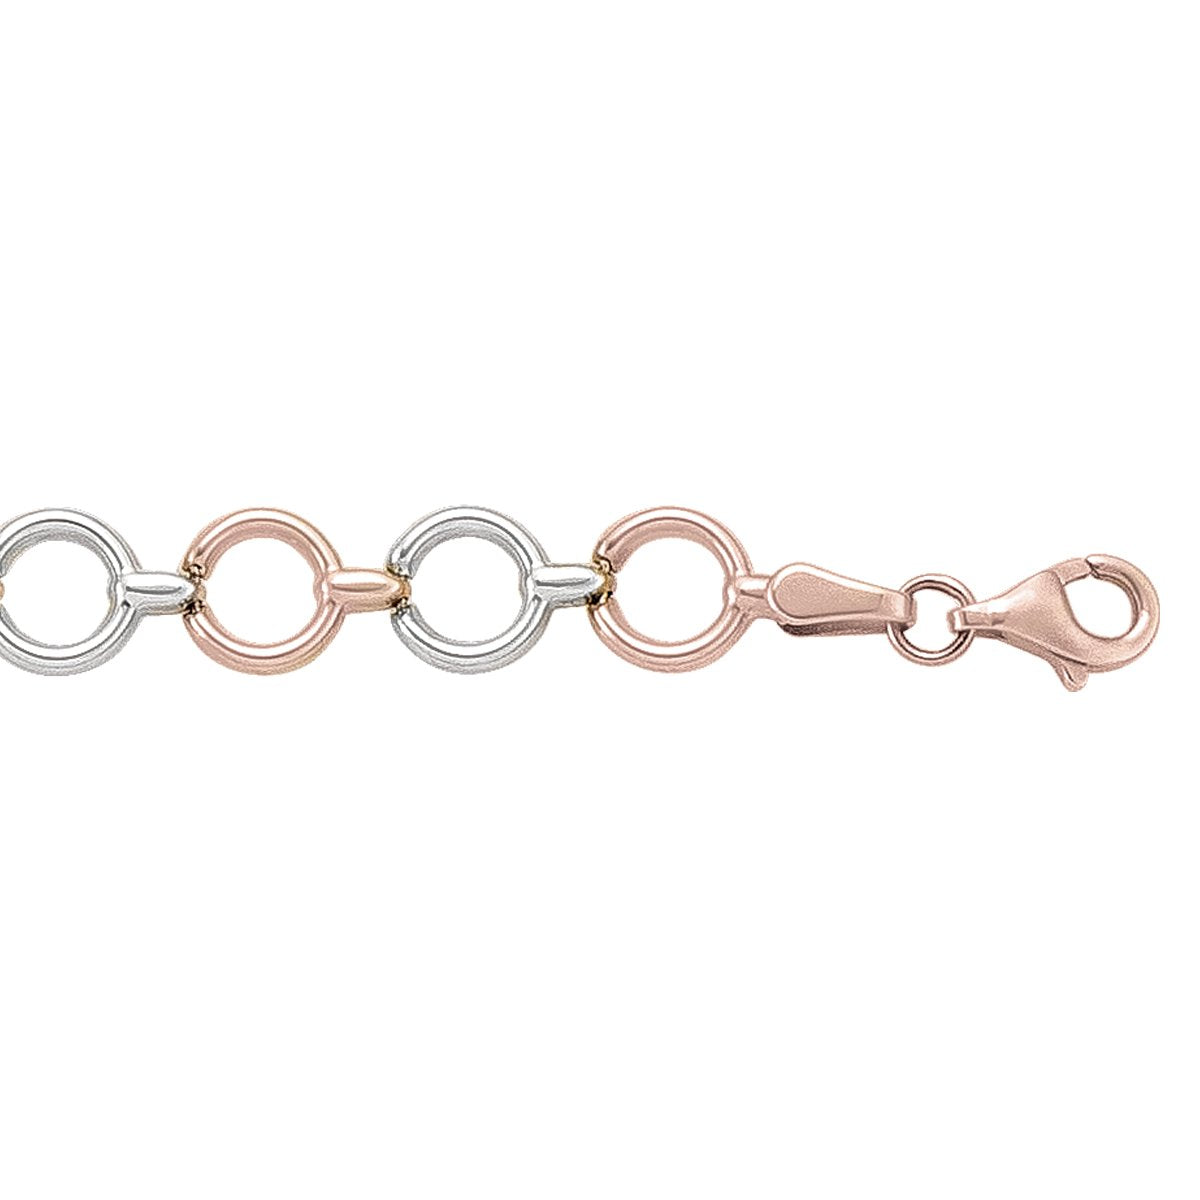 PINK AND WHITE GOLD FANCY HOLLOW BRACELET